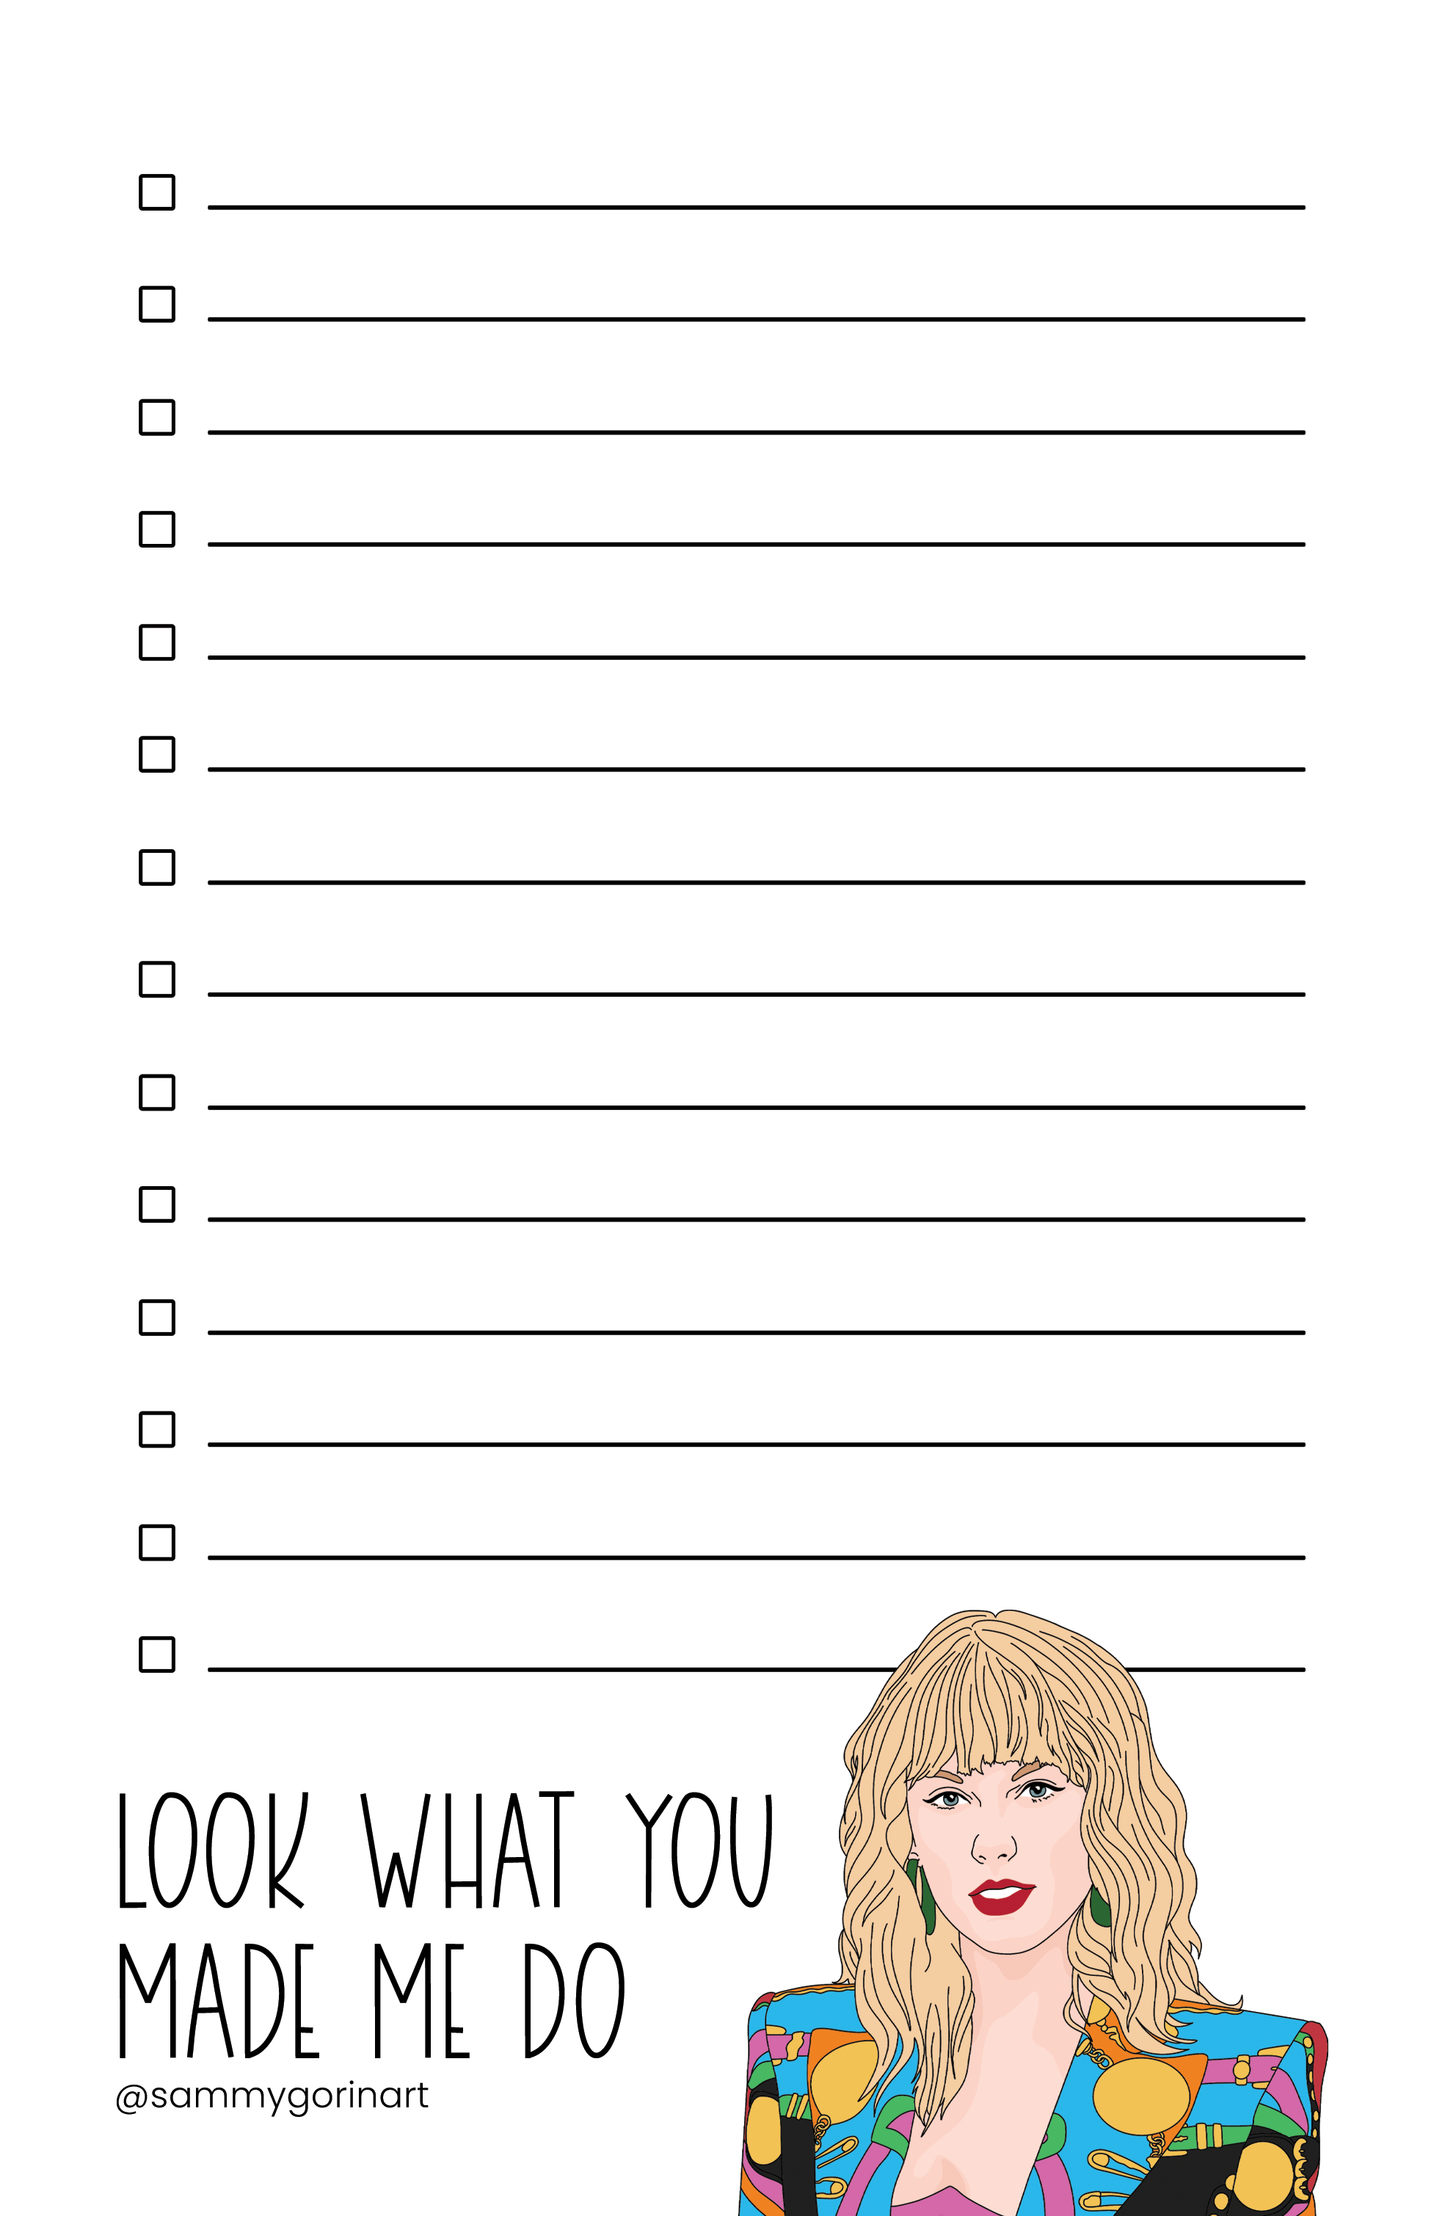 Taylor Swift, Look What You Made Me Do, Notepad